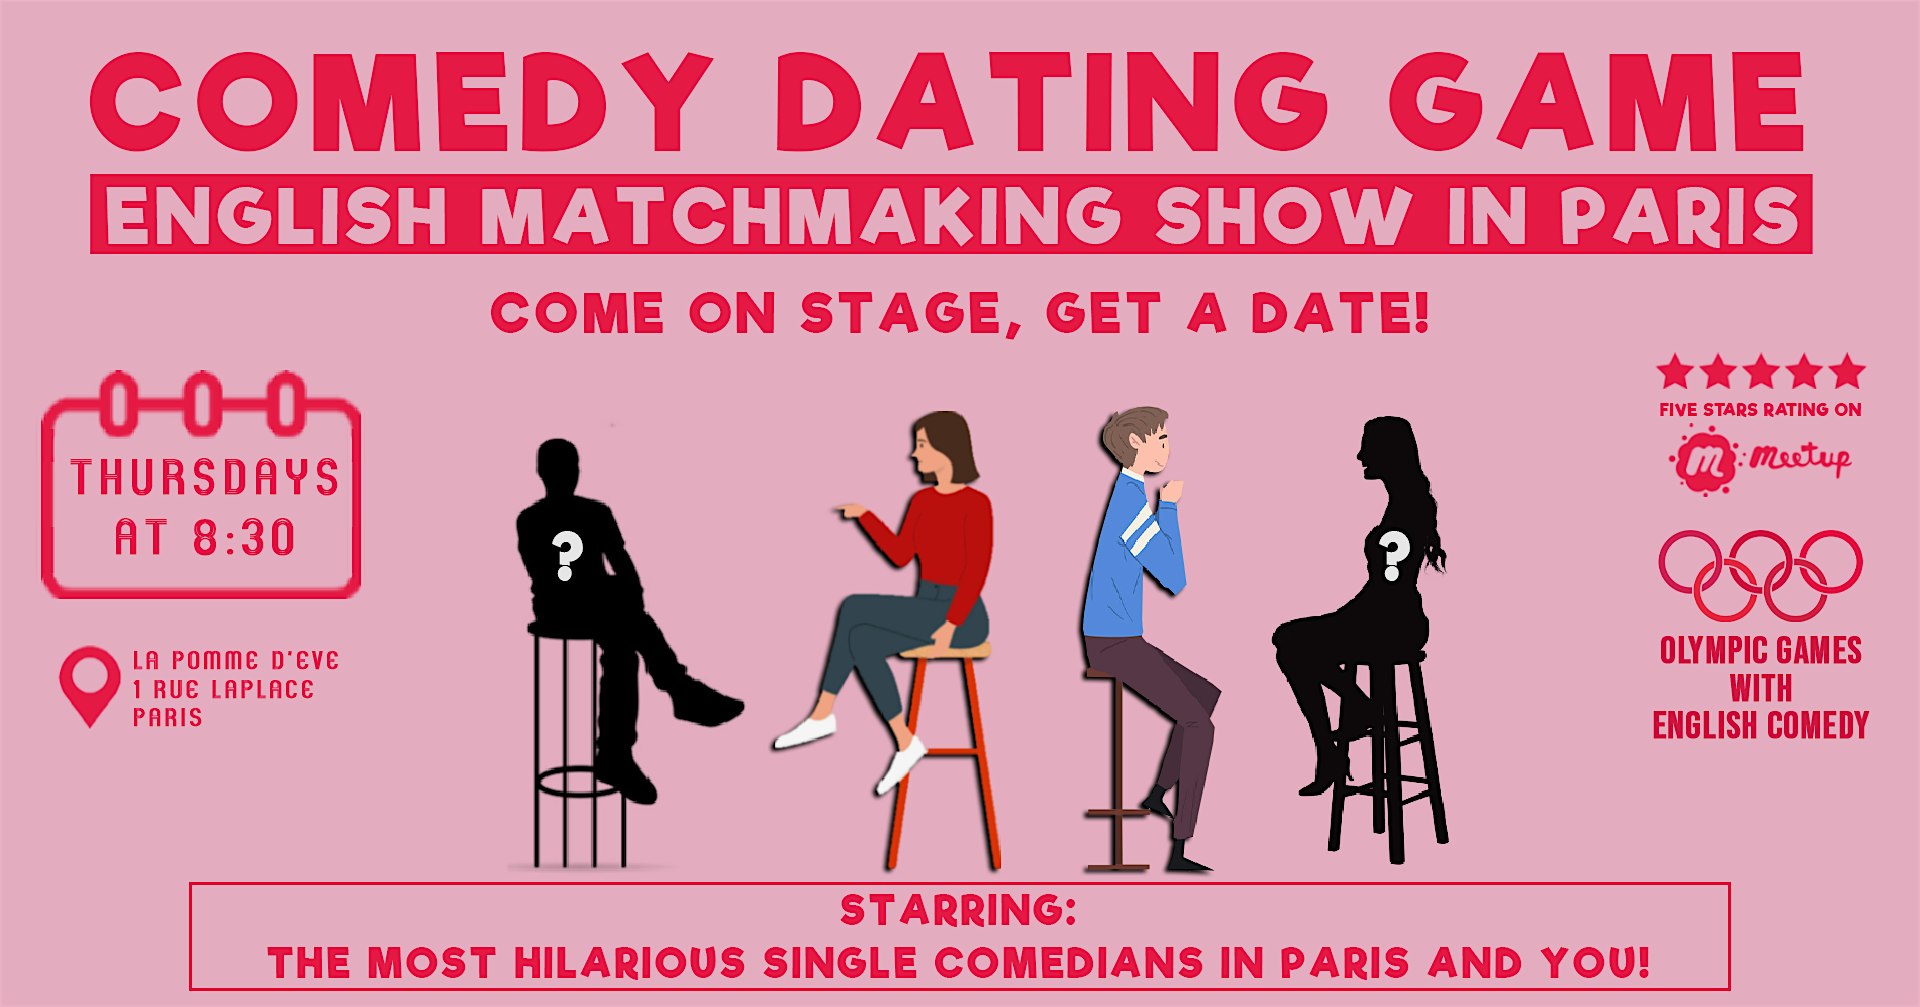 Comedy Dating Game – English Matchmaking Show in Paris